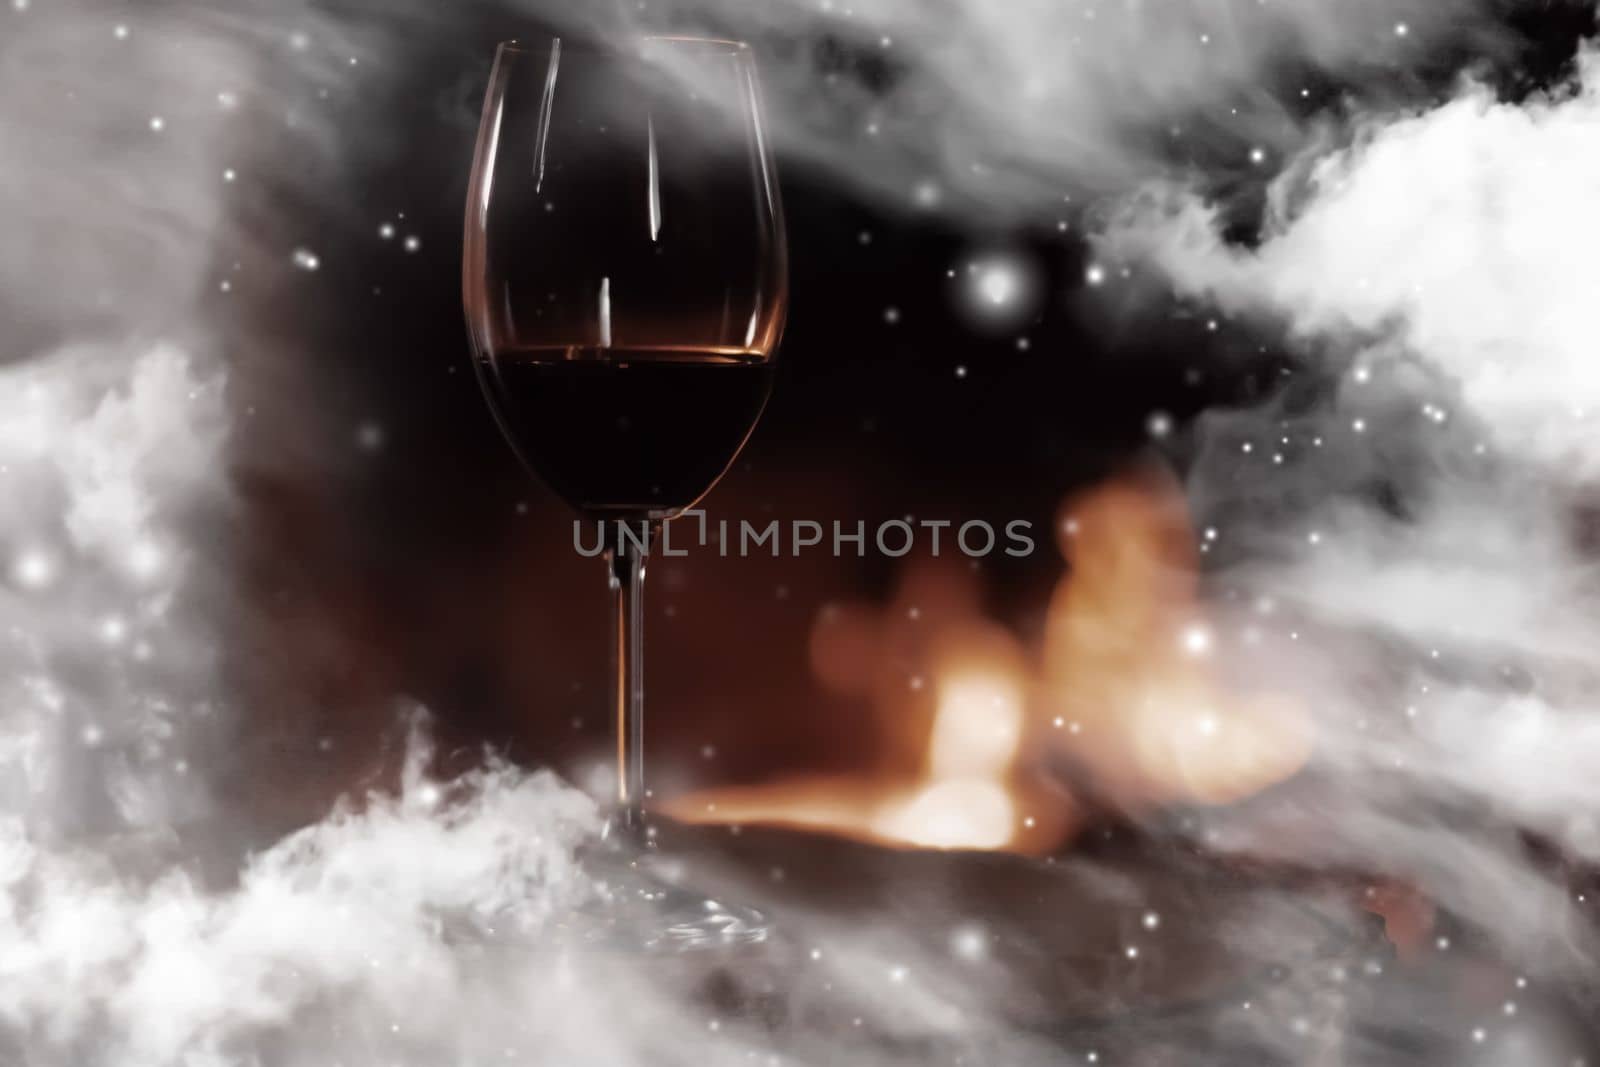 Winter atmosphere and Christmas holiday time, glass of wine in front of fireplace covered with snowy effect on window glass, holidays background by Anneleven